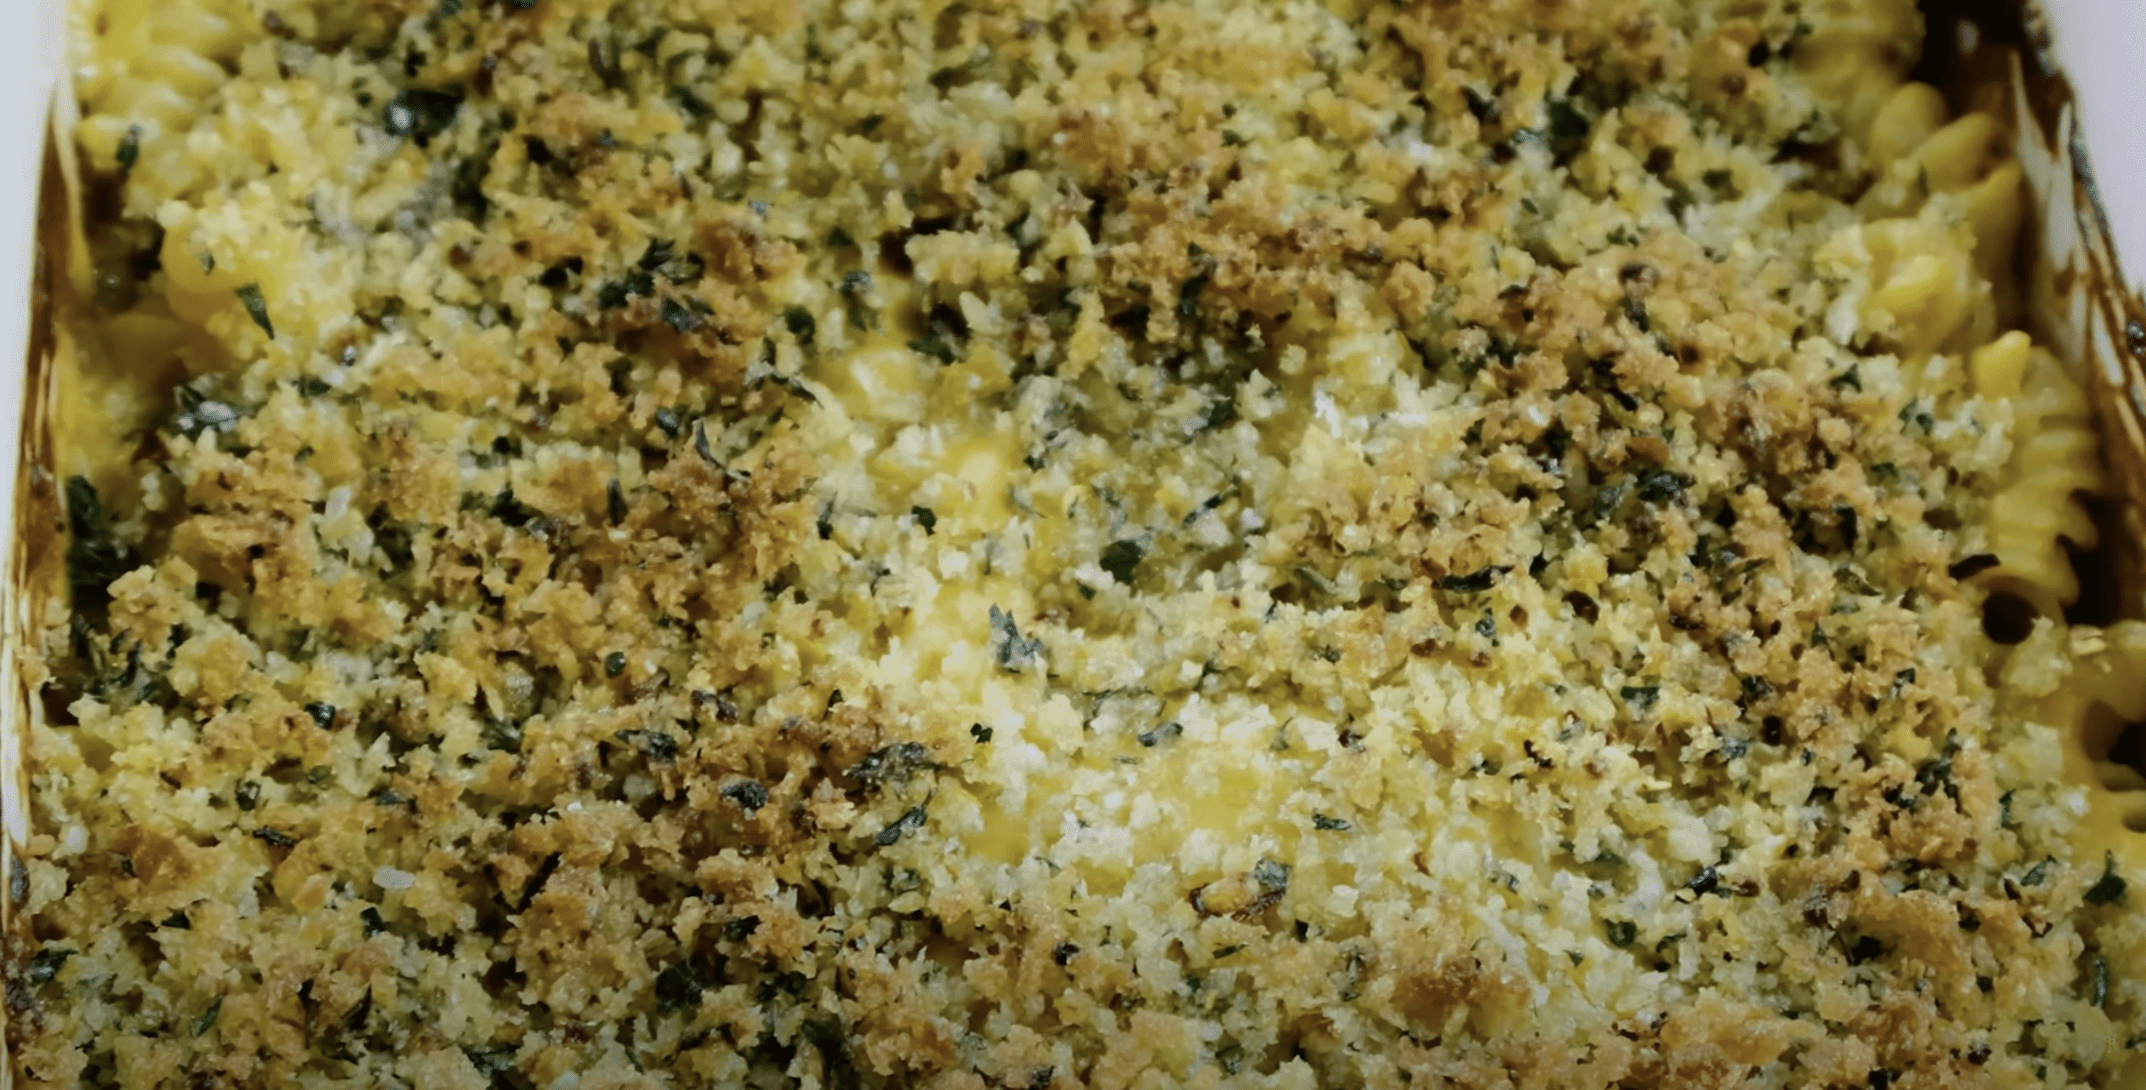 Finished Baked mac and cheese